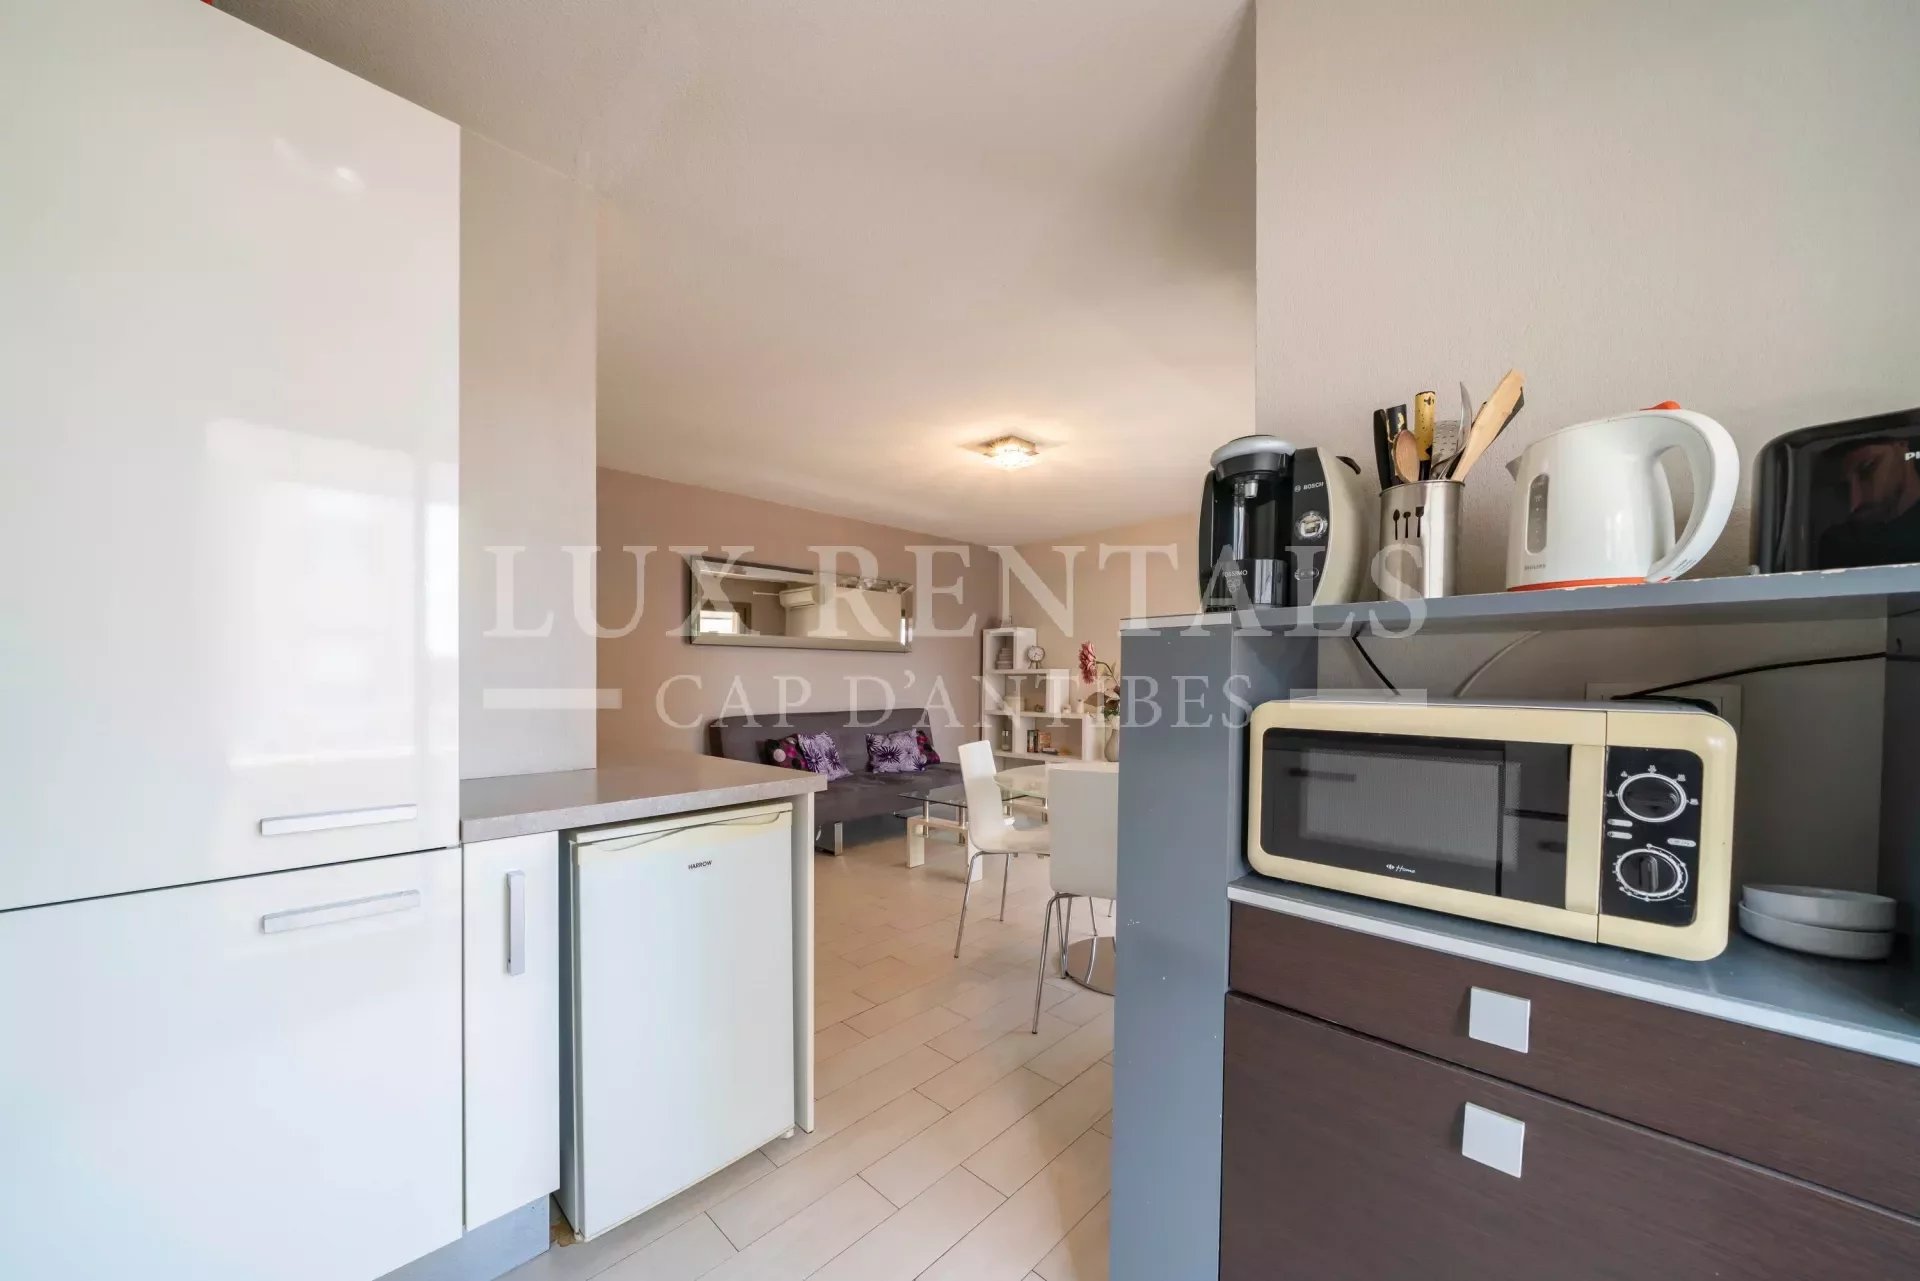 Thumbnail 3 Location Appartement - Antibes Vieil Antibes